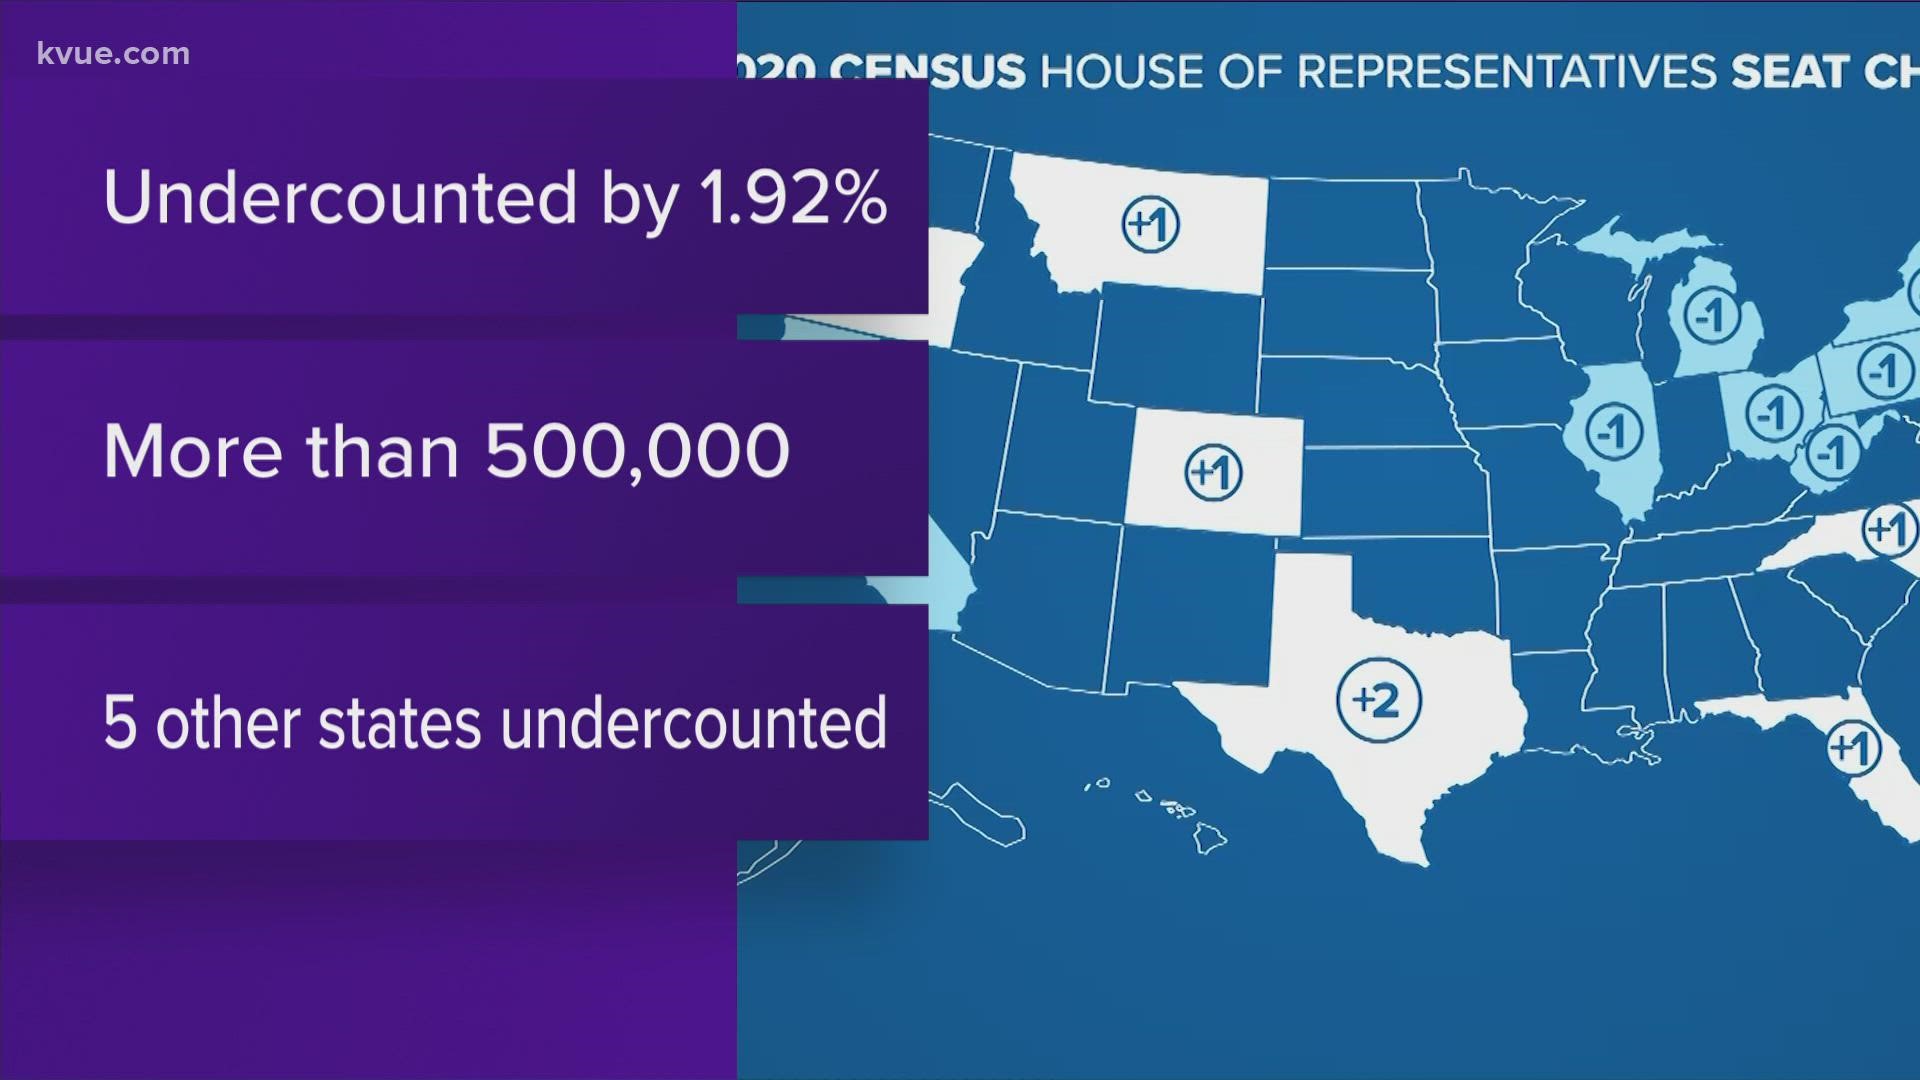 In Florida and Texas, undercounts appear to have cost them congressional seats too.